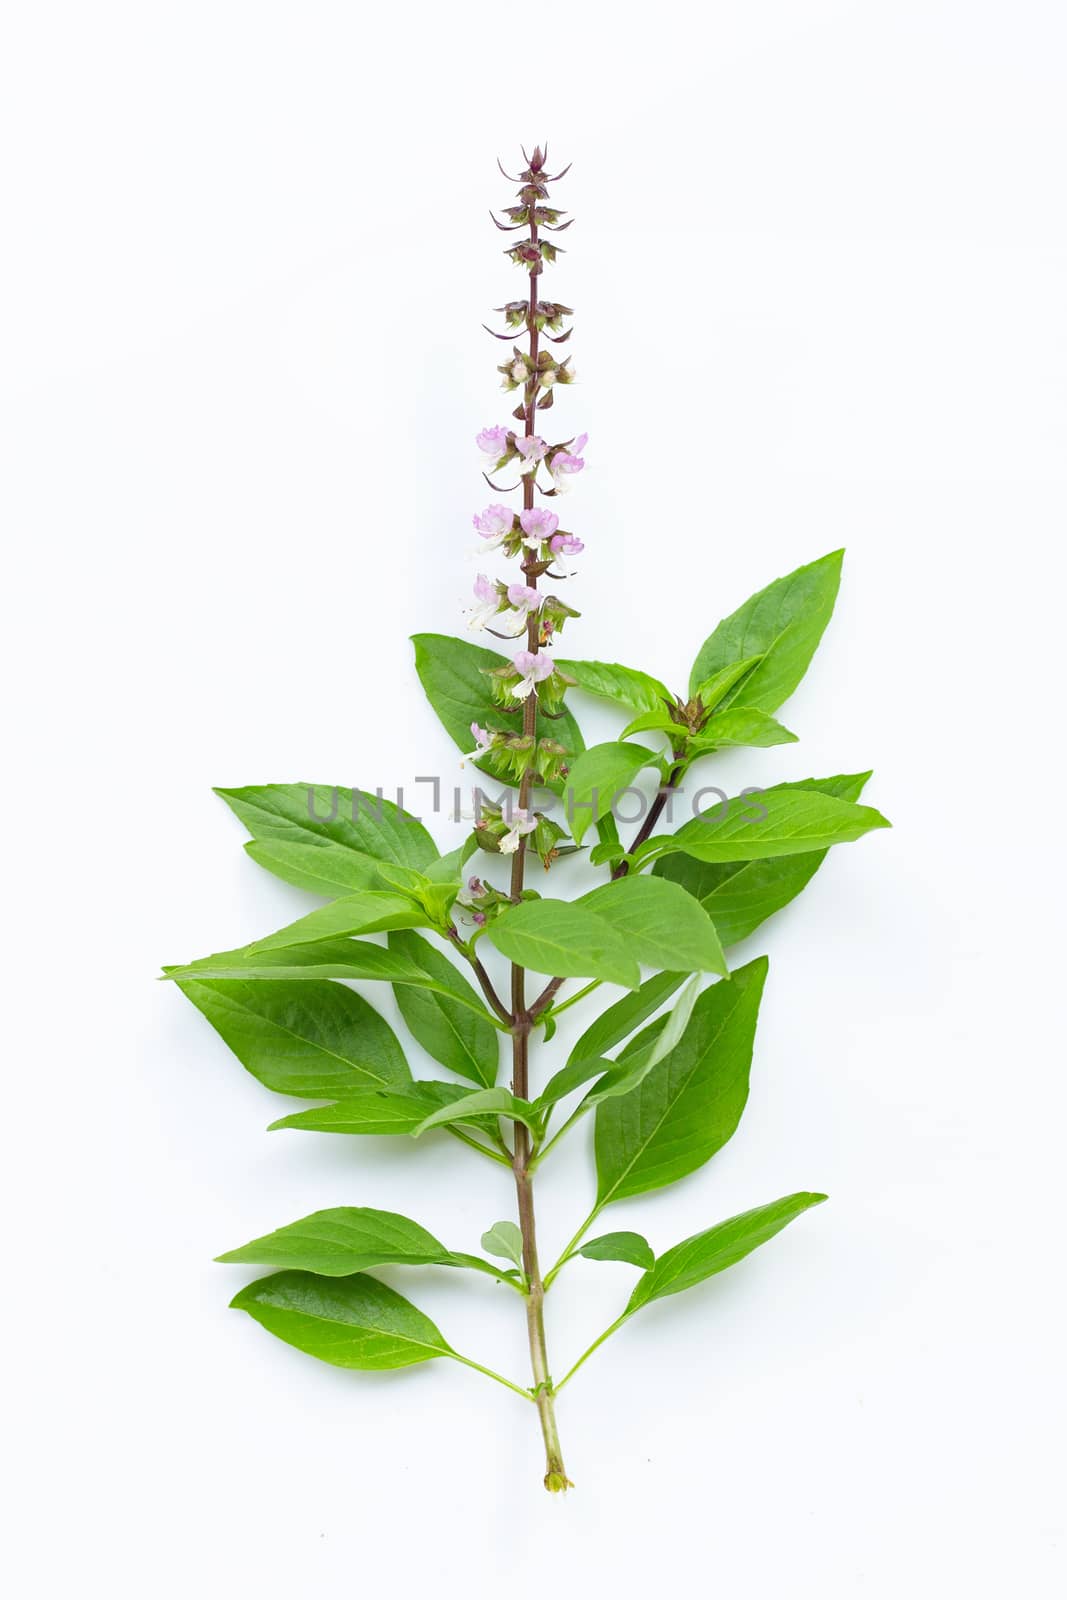 Sweet basil leaves with flower on white background.